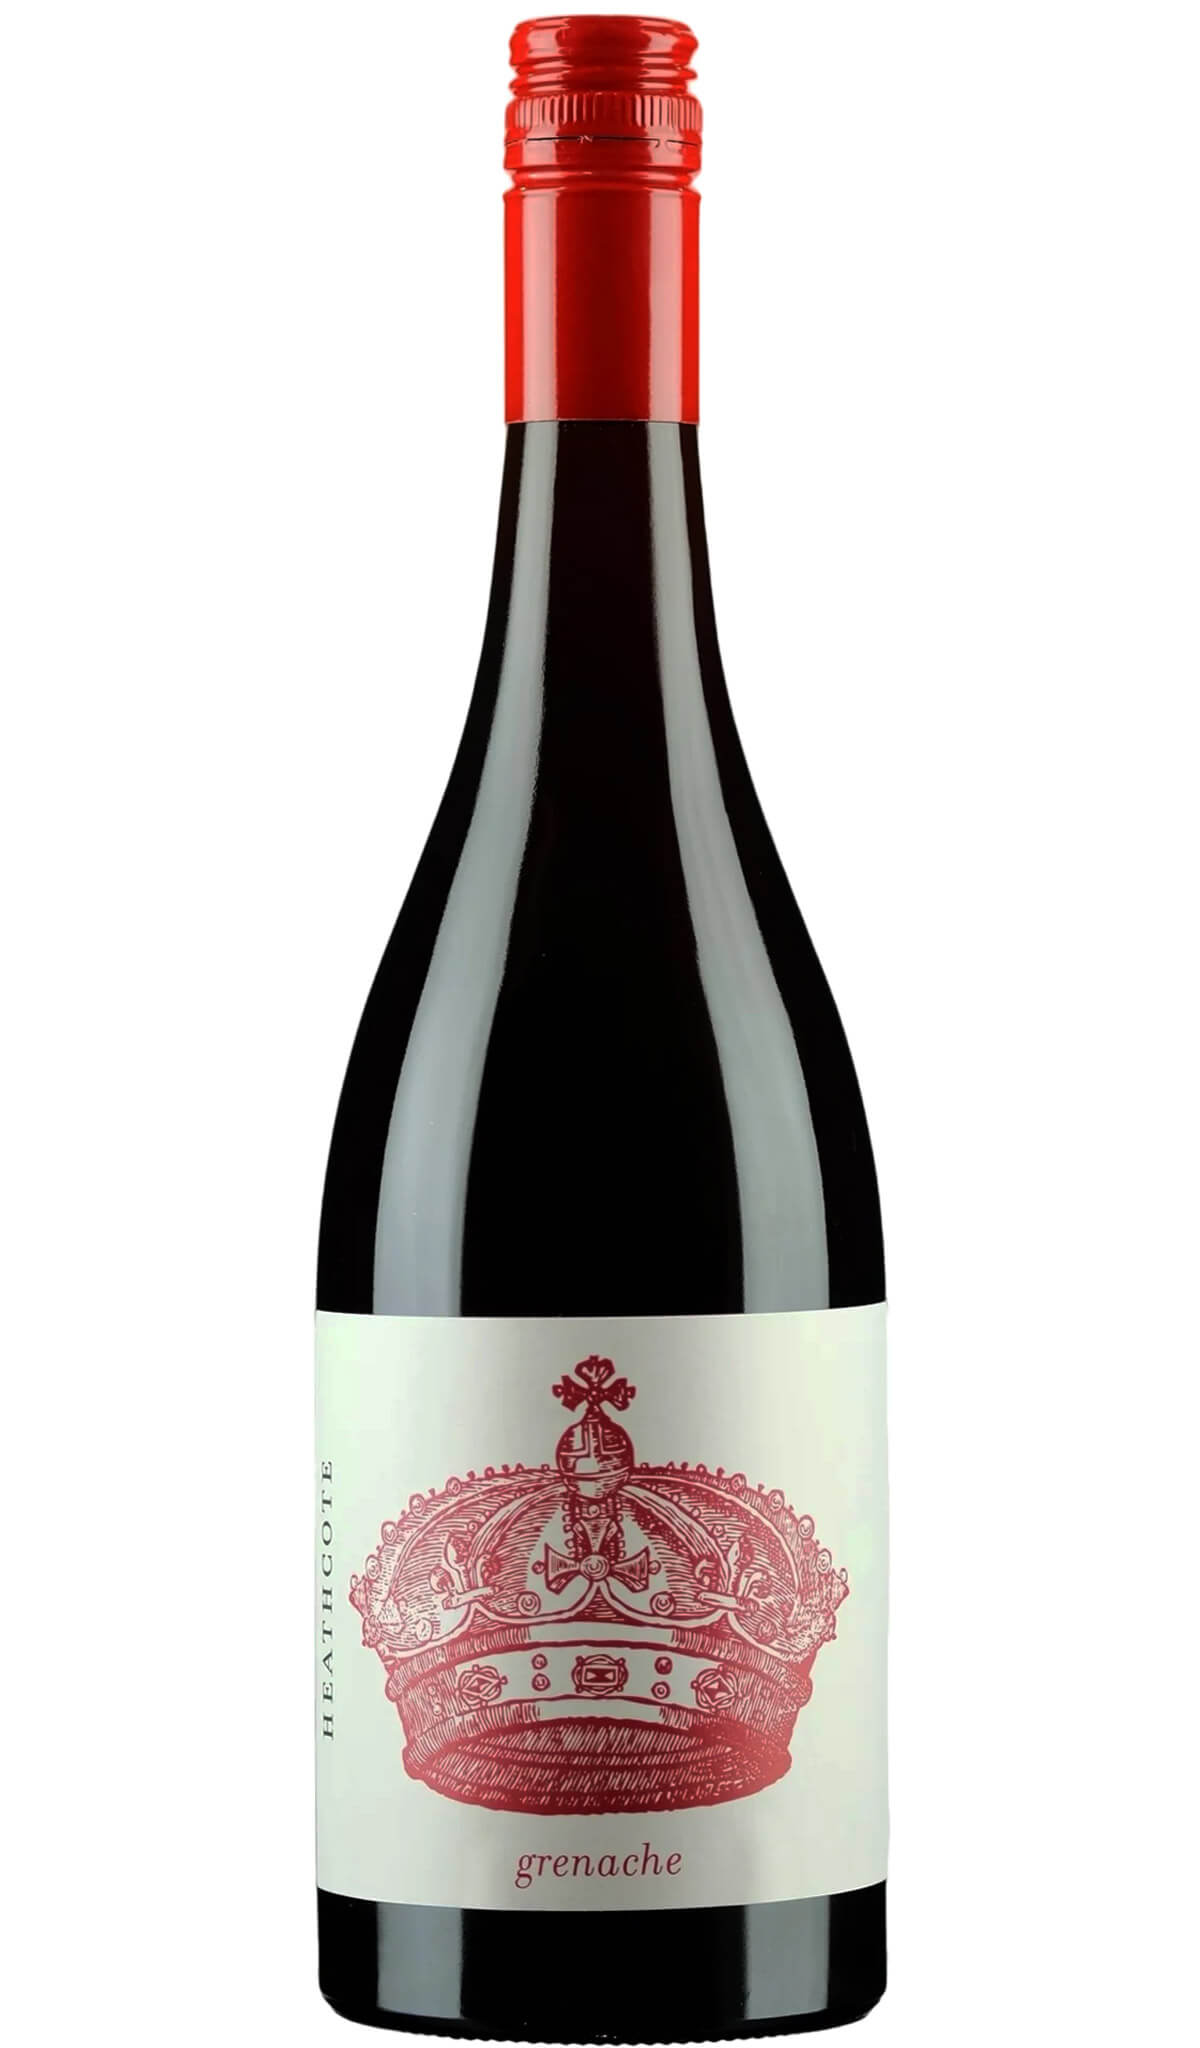 Find out more, explore the range and buy Noble Red Heathcote Grenache 2021 available online at Wine Sellers Direct - Australia's independent liquor specialists.